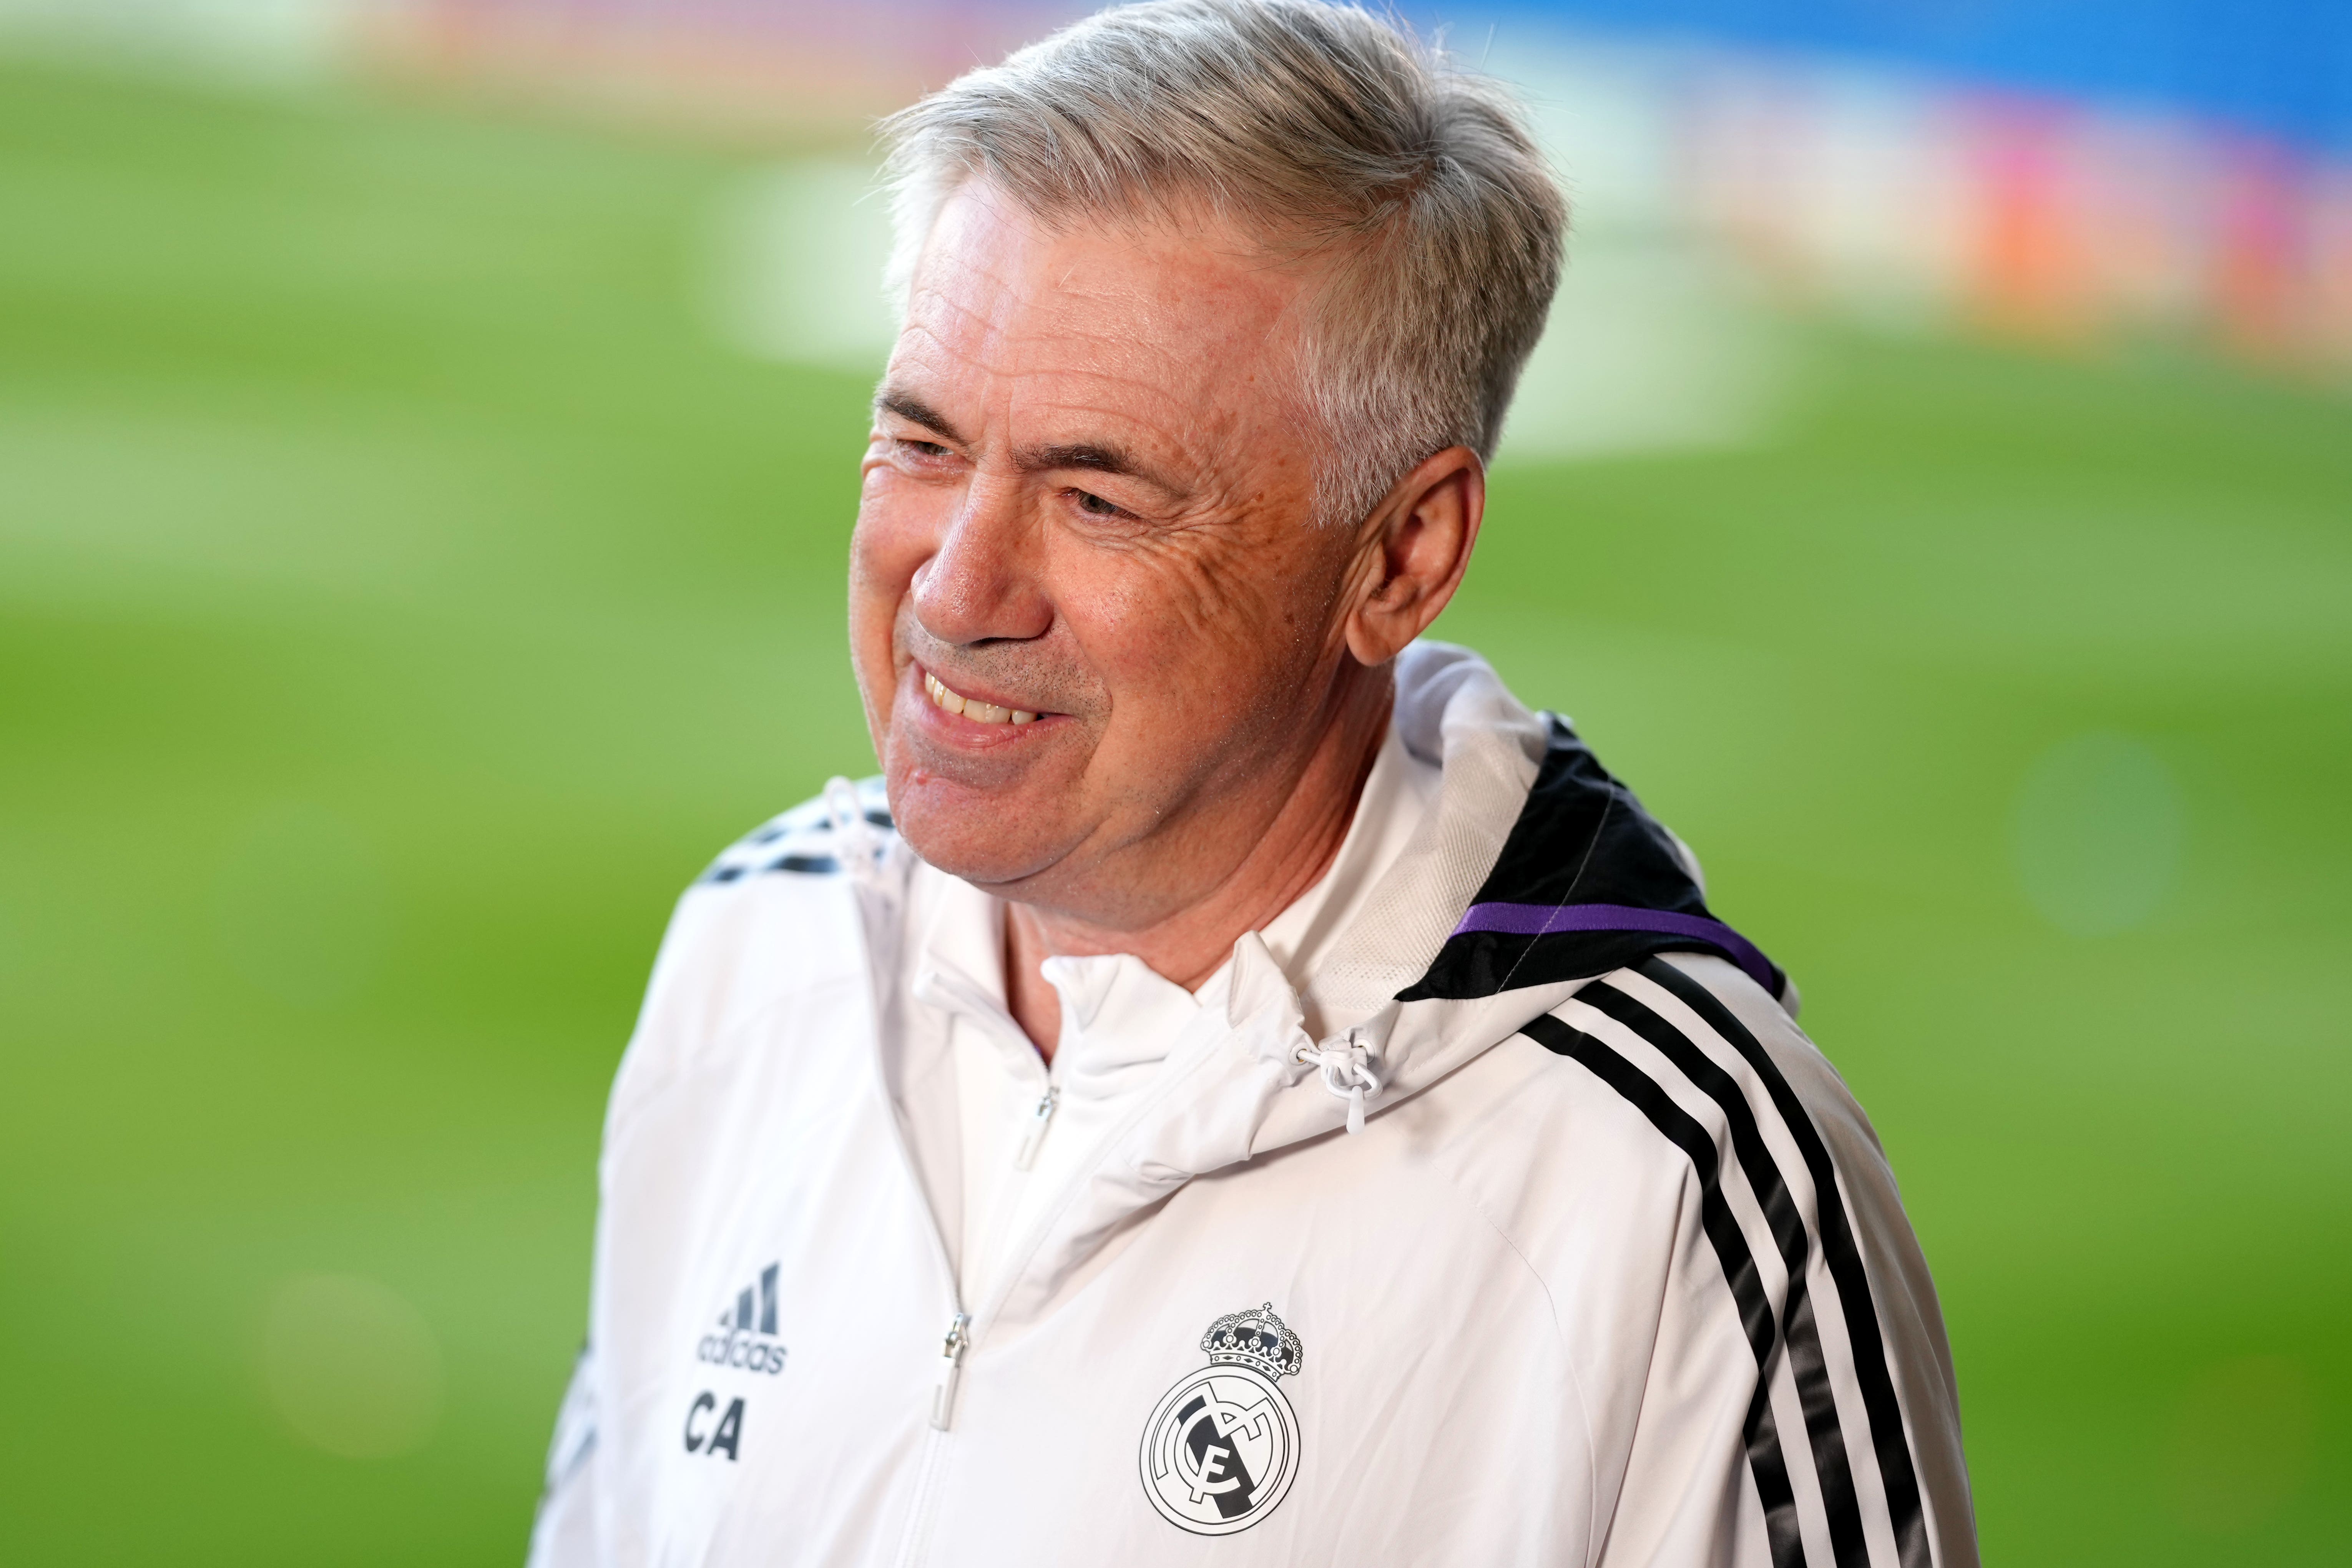 Carlo Ancelotti may not have been Real Madrid’s first choice but his appointment has worked out well